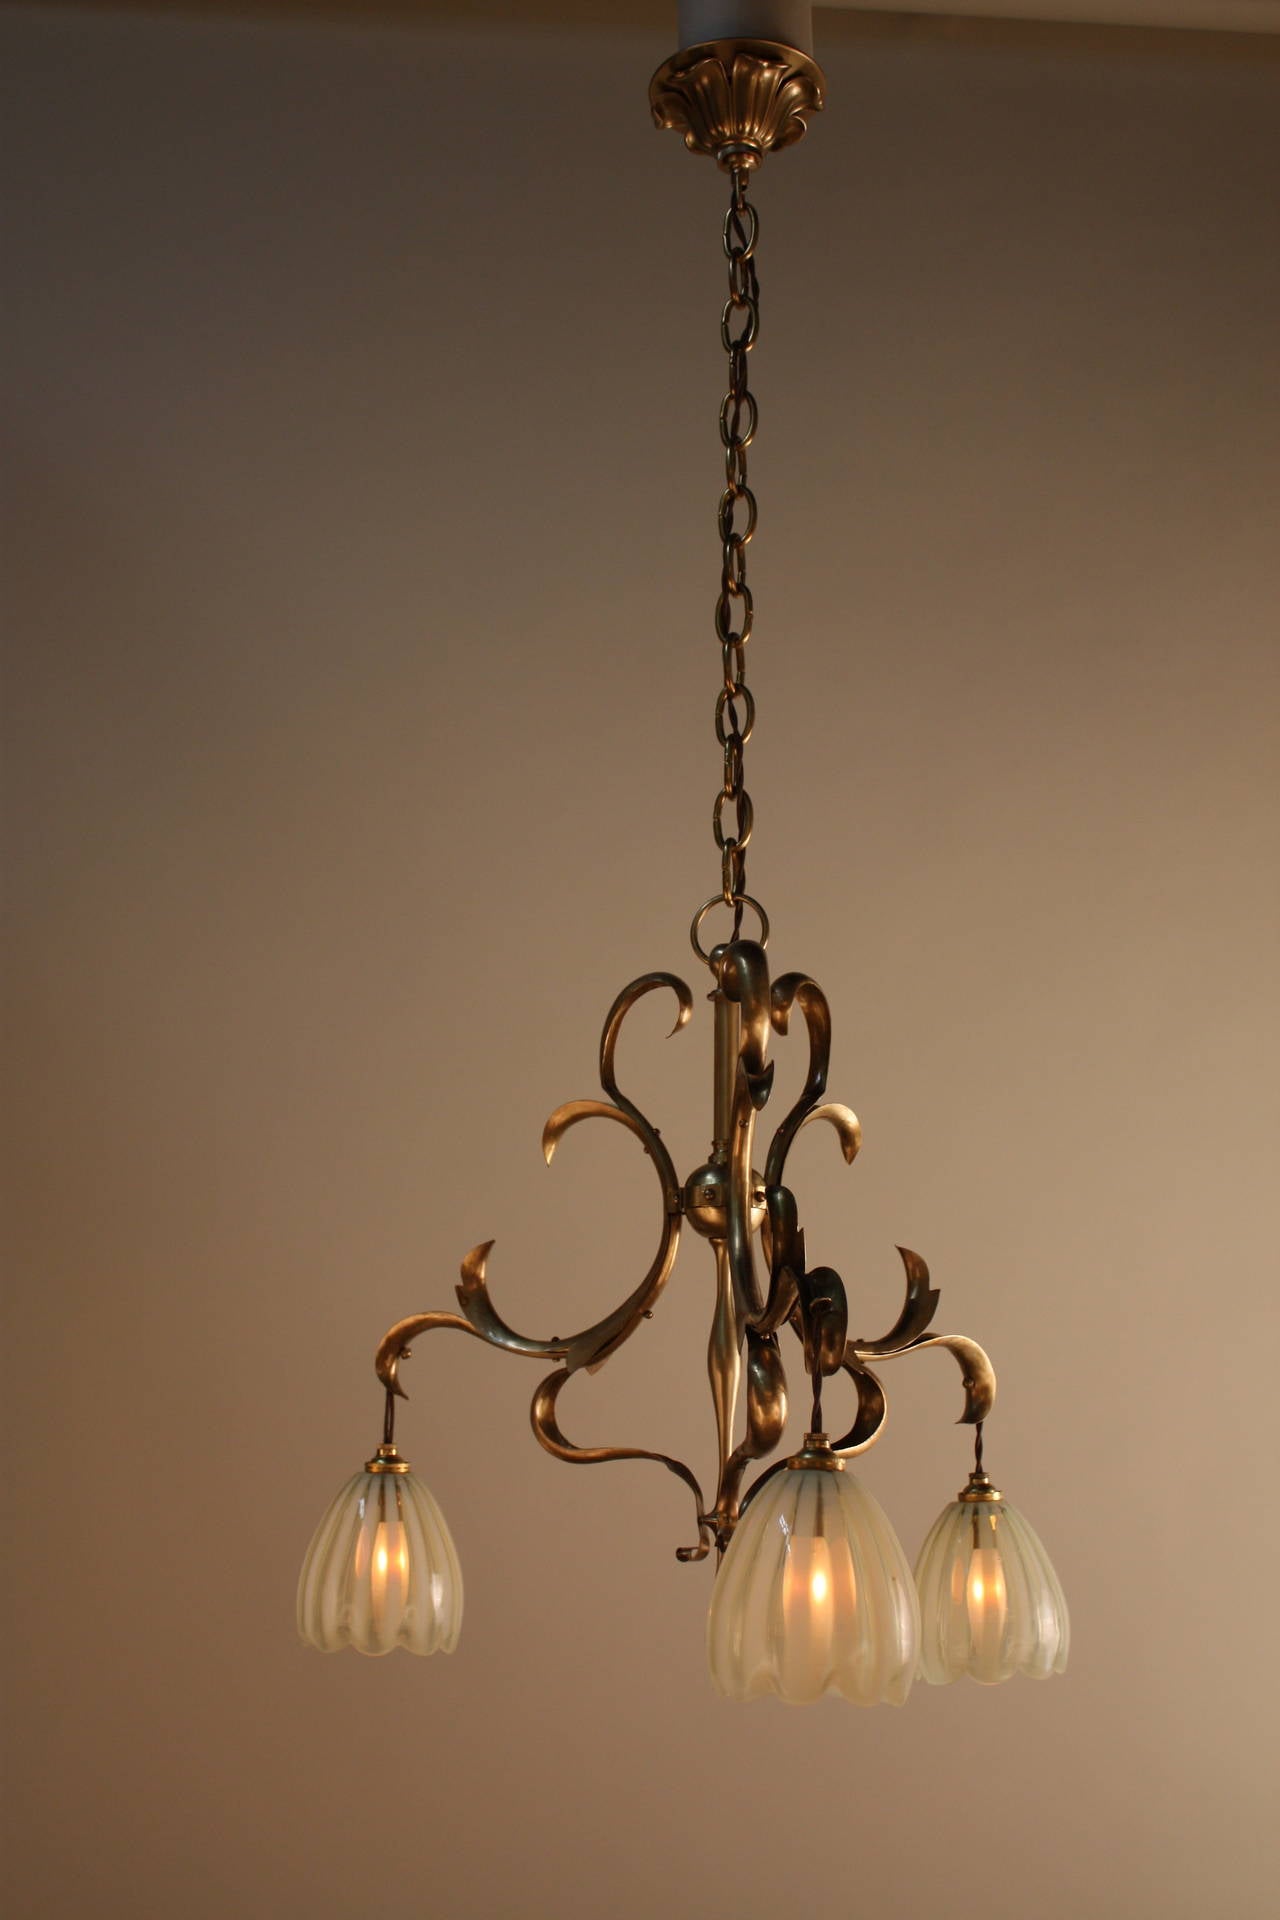 Fantastic brass Art Nouveau chandelier with three beautiful opalescent glass shades.